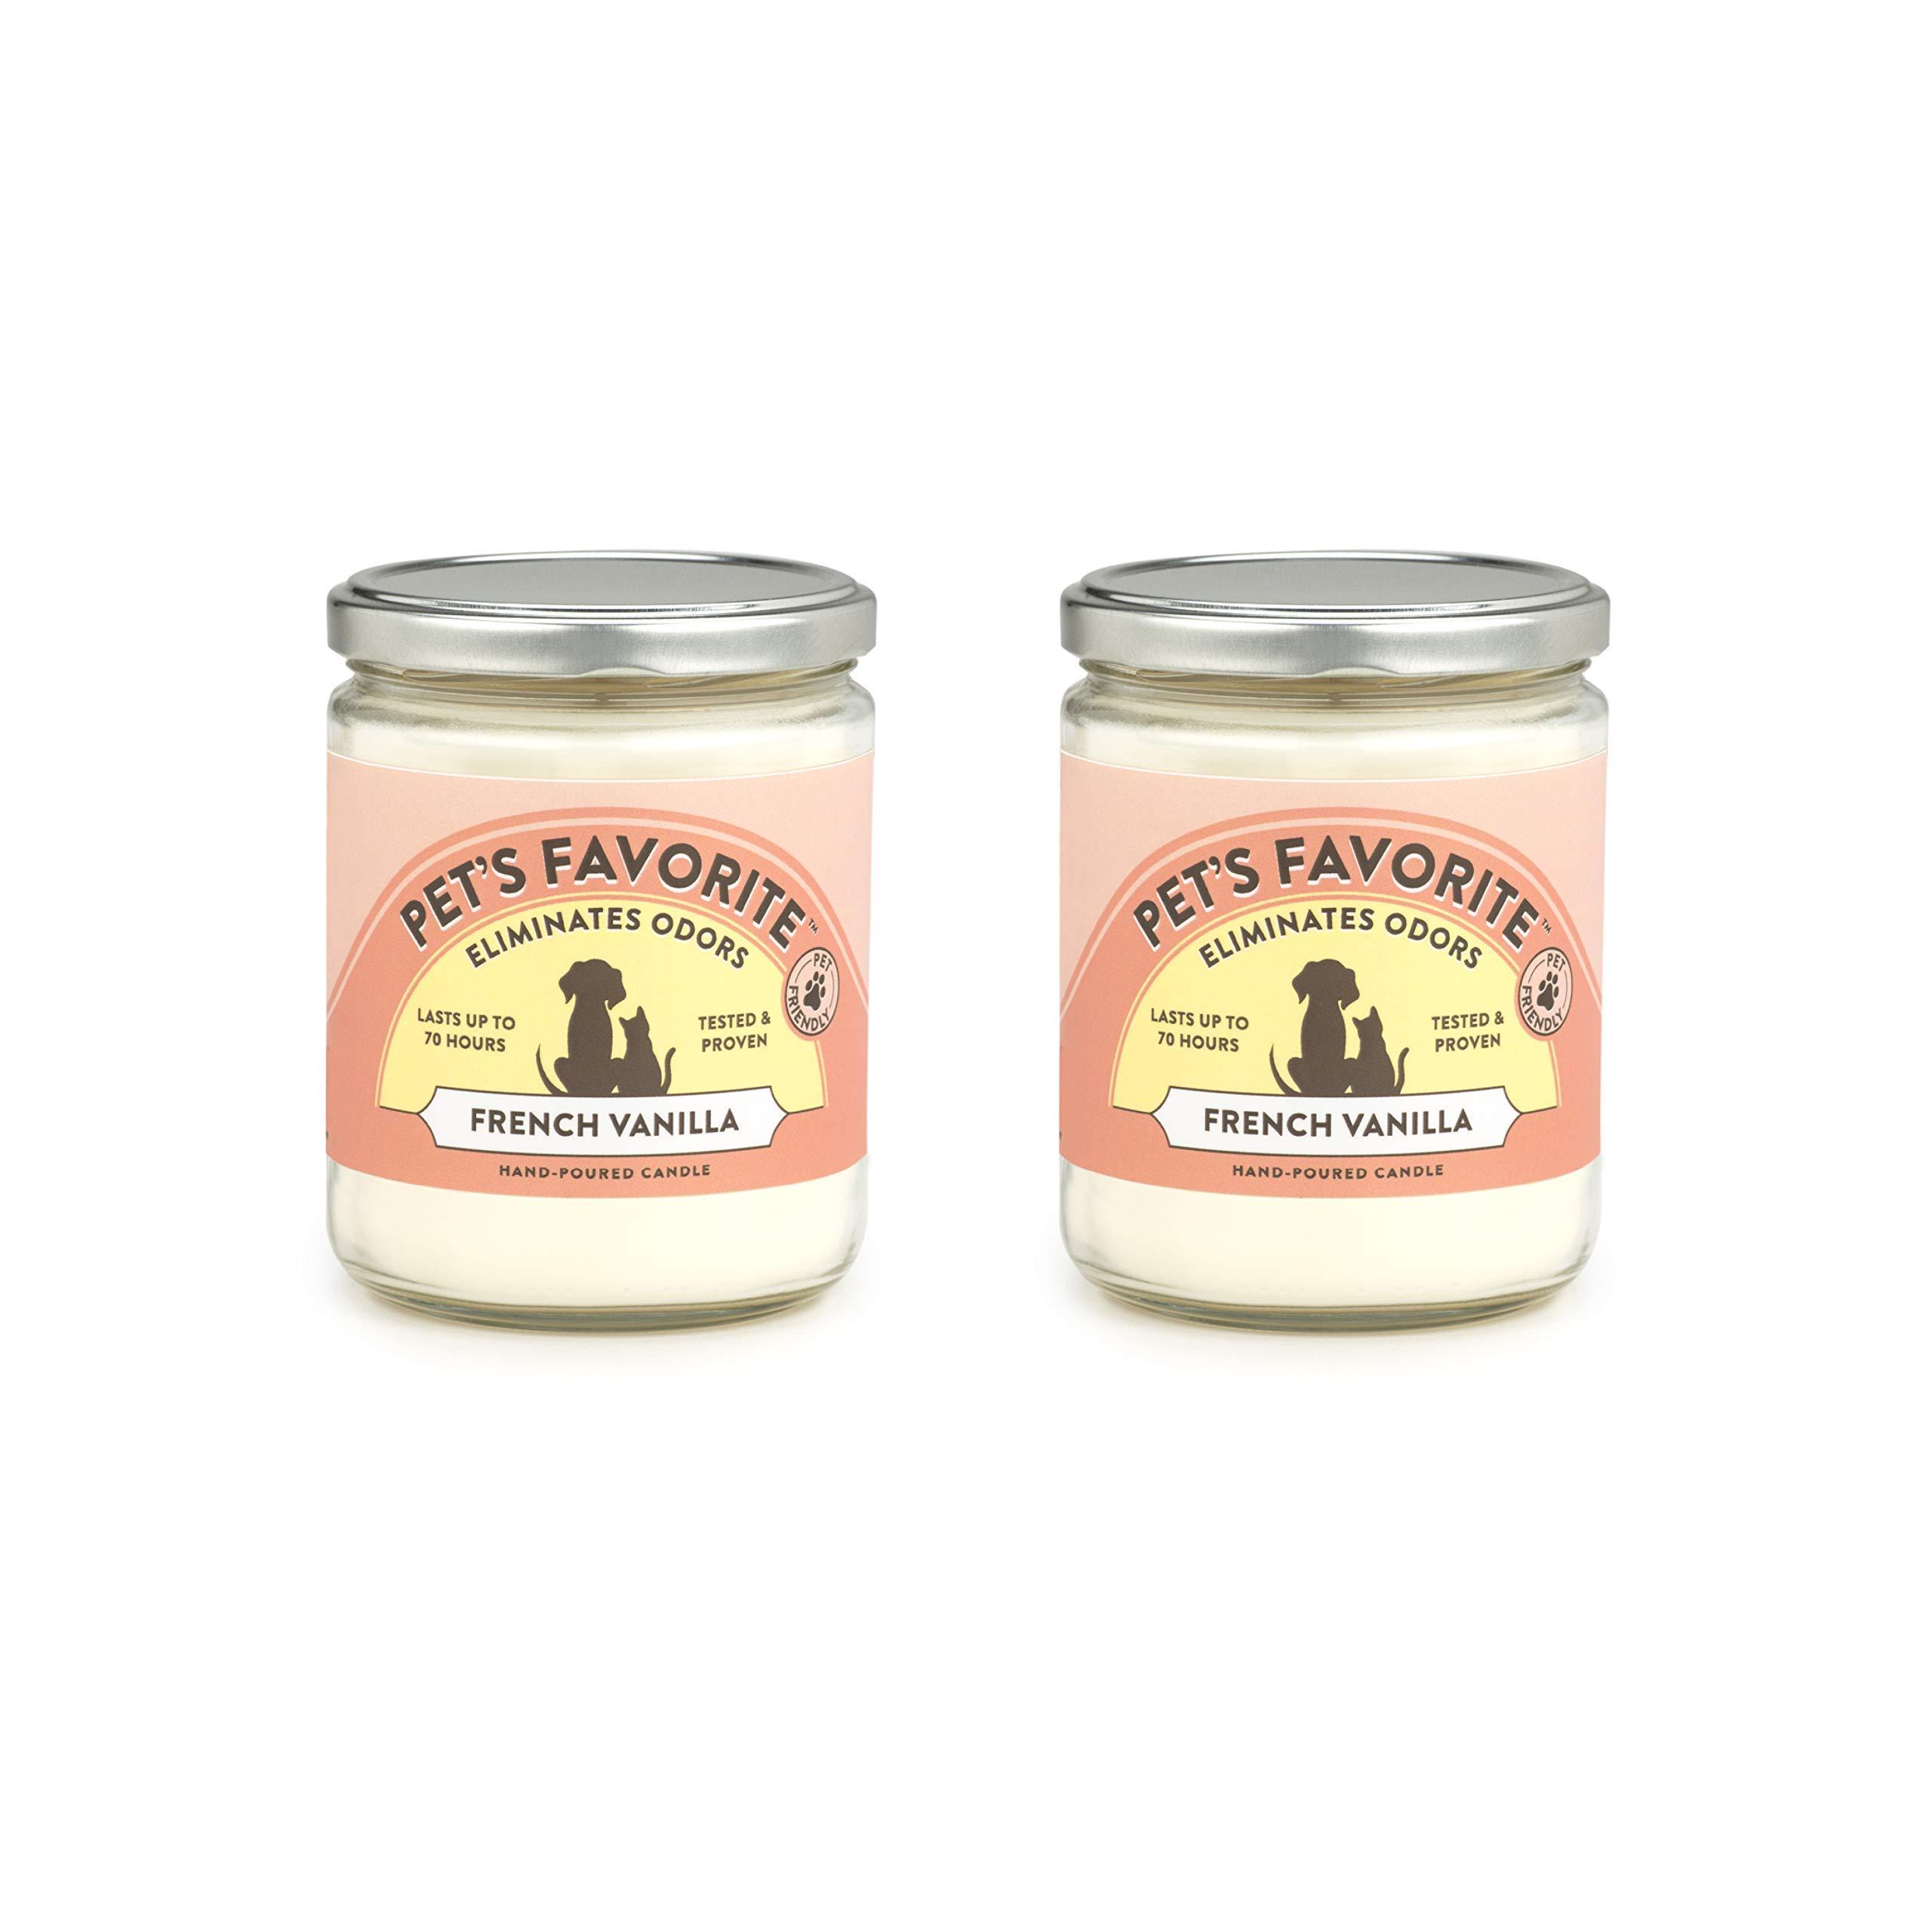 Pet\\\'s Favorite - Tested & Proven - Odor Eliminating Candle, Pet-Friendly Scented Candle, in 4 Great Fragrances - 70-Hour Burn Time, Cotton Wick (French Vanilla, Pack of 2)